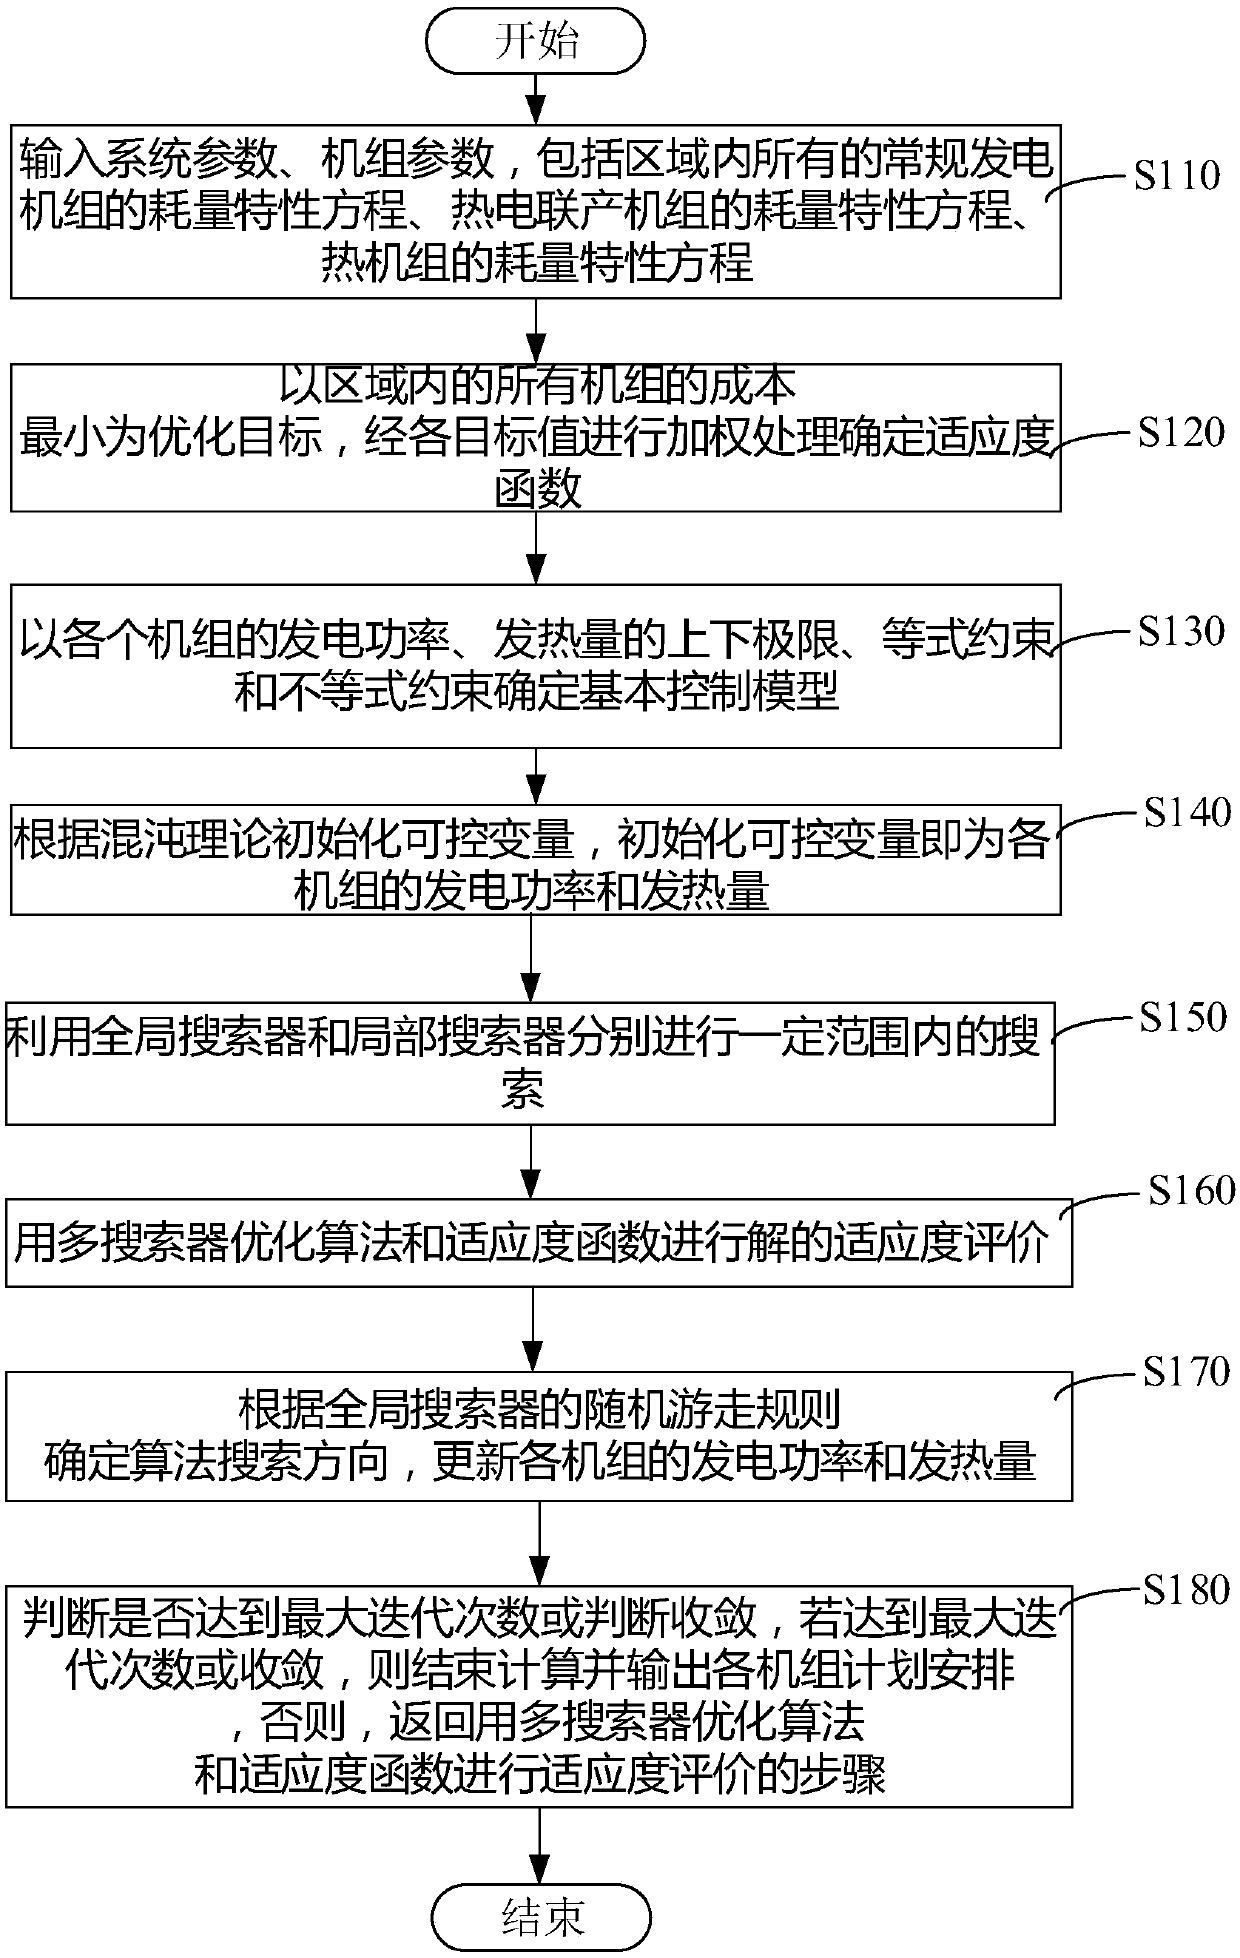 Electric-heating network coordinated operation optimization method based on multi-searcher algorithm